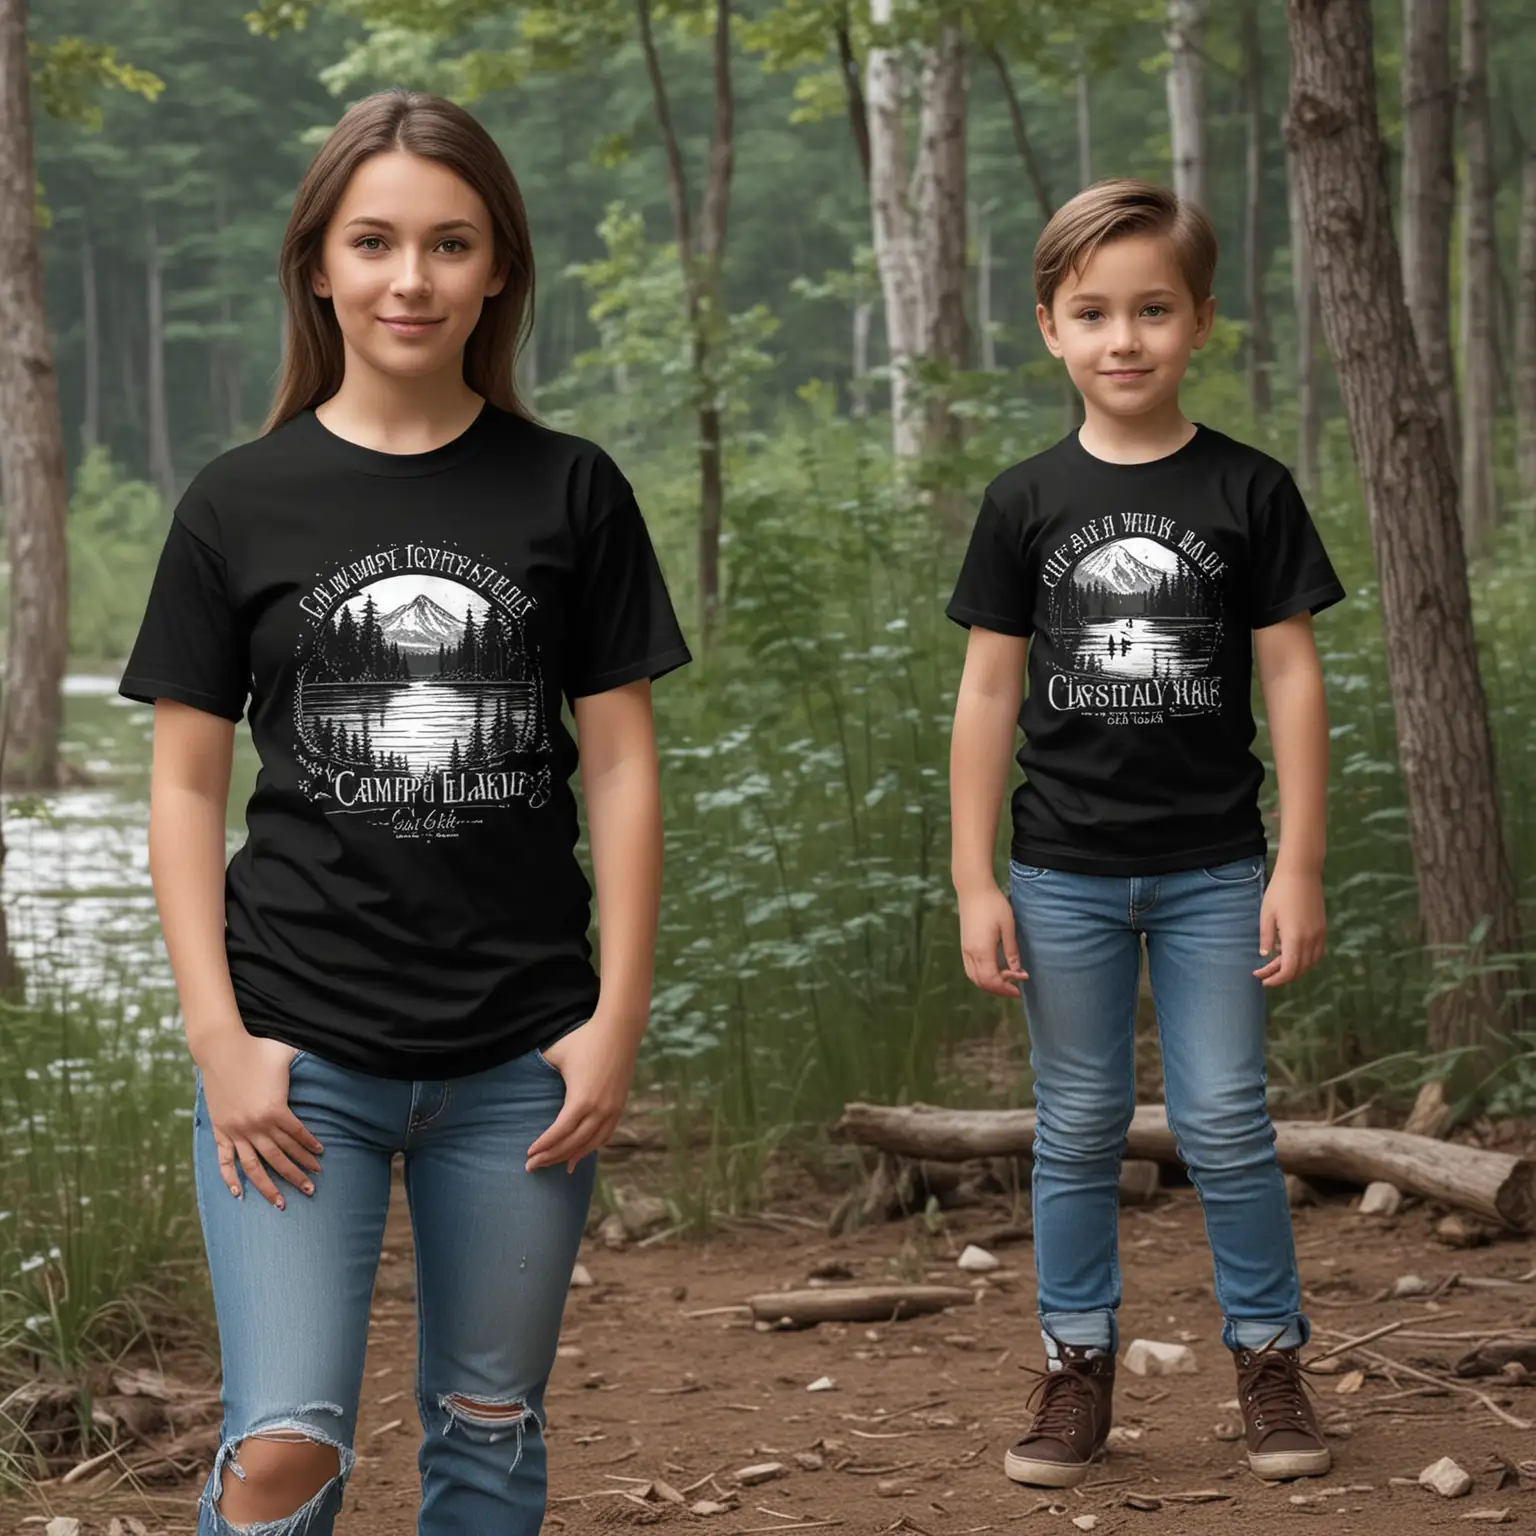 MOCKUP FOR A BLACK TEE.  THERE SHOULD BE 2 MODELS.  THE FIRST MODEL SHOULD BE A  FEMALE.  THE SECOND SHOULD BE A LITTLE BOY.  THEY SHOULD BE STANDING OUTSIDE AT CAMP CRYSTAL LAKE